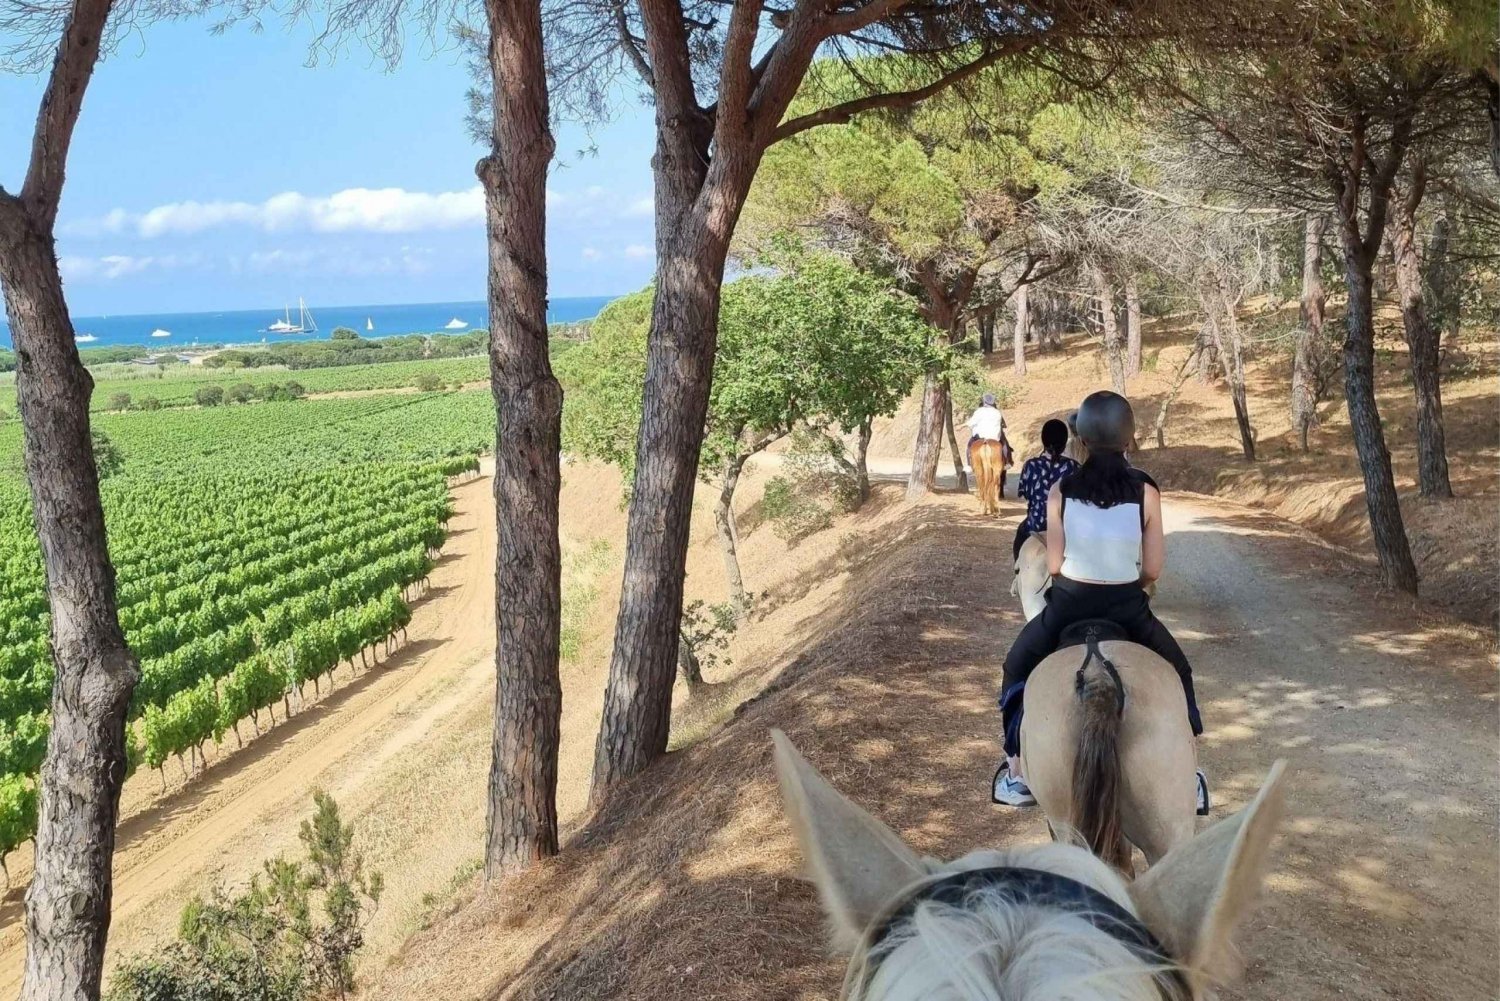 Horse back riding + wine tasting in Ramatuelle